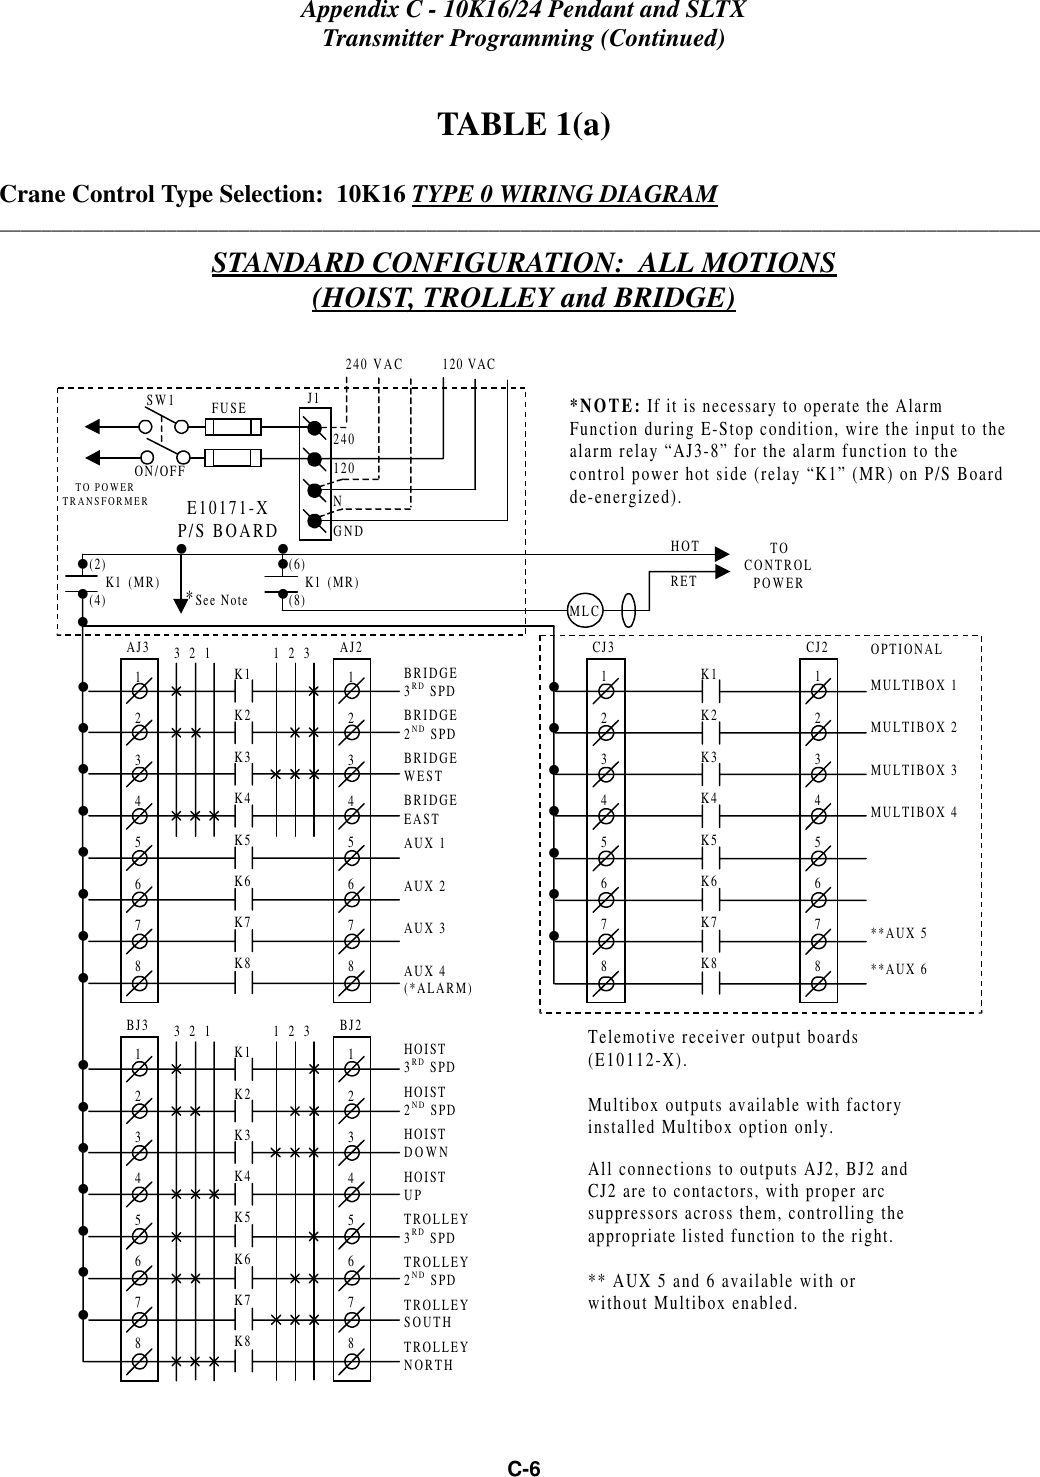 Appendix C - 10K16/24 Pendant and SLTXTransmitter Programming (Continued)C-6TABLE 1(a)Crane Control Type Selection:  10K16 TYPE 0 WIRING DIAGRAM____________________________________________________________________________________________________STANDARD CONFIGURATION:  ALL MOTIONS(HOIST, TROLLEY and BRIDGE)CJ312345678CJ212345678K1K2K3K4K5K6K7K8OPTIONALMULTIBOX 1MULTIBOX 2MULTIBOX 3MULTIBOX 4**AUX 5**AUX 6•••••••BJ312345678BJ212345678K1K2K3K4K5K6K7K83  2  1 1  2  3 HOIST3RD SPDHOIST2ND SPDHOISTDOWNHOISTUPTROLLEY3RD SPDTROLLEY2ND SPDTROLLEYSOUTHTROLLEYNORTH•••••••AJ312345678AJ212345678K1K2K3K4K5K6K7K83  2  1 1  2  3BRIDGE3RD SPDBRIDGE2ND SPDBRIDGEWESTBRIDGEEASTAUX 1AUX 2AUX 3AUX 4(*ALARM)••••••••*NOTE: If it is necessary to operate the AlarmFunction during E-Stop condition, wire the input to thealarm relay “AJ3-8” for the alarm function to thecontrol power hot side (relay “K1” (MR) on P/S Boardde-energized).Telemotive receiver output boards(E10112-X).Multibox outputs available with factoryinstalled Multibox option only.All connections to outputs AJ2, BJ2 andCJ2 are to contactors, with proper arcsuppressors across them, controlling theappropriate listed function to the right.** AUX 5 and 6 available with orwithout Multibox enabled.TOCONTROLPOWER•240 VAC          120 VACSW1ON/OFFTO POWERTRANSFORMERE10171-XP/S BOARDHOTRET(2)    K1 (MR)(4)••*See Note•240120FUSE J1NGND(6)    K1 (MR)(8)•••MLC